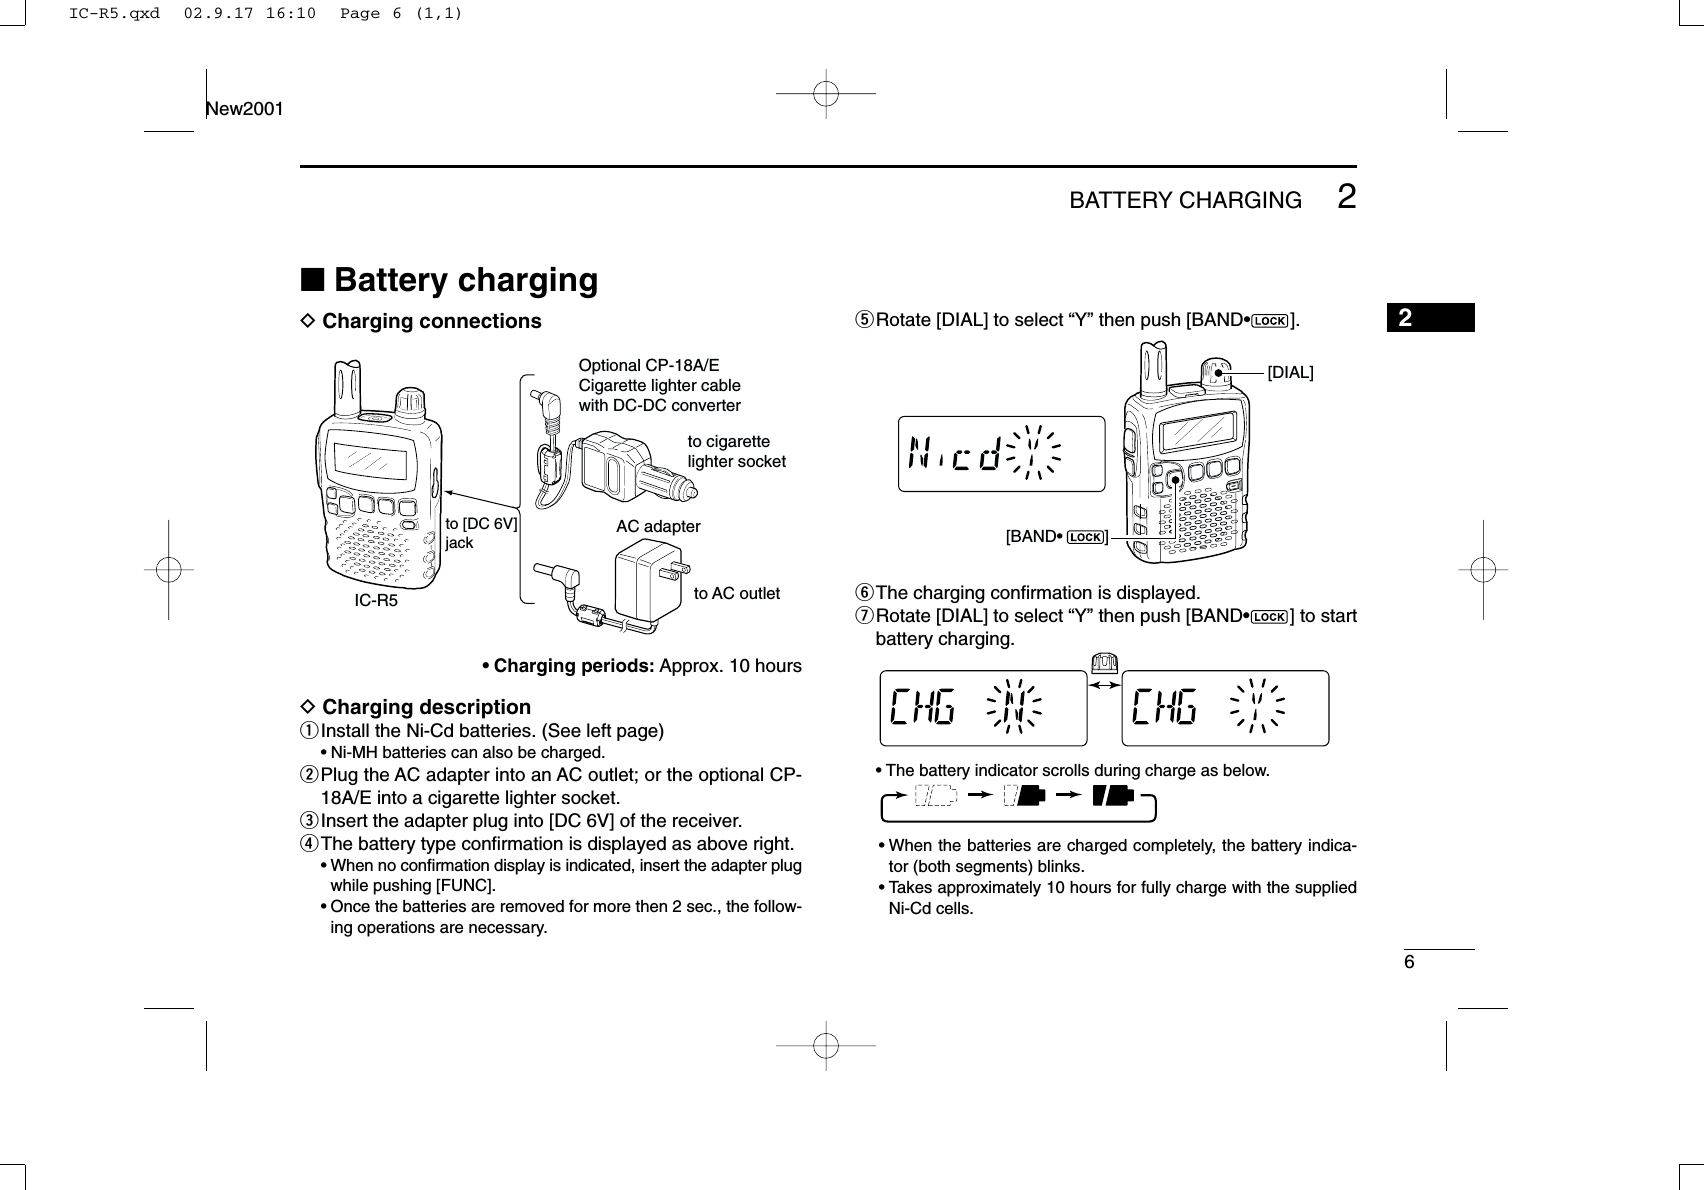 62BATTERY CHARGINGNew20012■Battery chargingDCharging connections•Charging periods: Approx. 10 hoursDCharging descriptionqInstall the Ni-Cd batteries. (See left page)•Ni-MH batteries can also be charged.wPlug the AC adapter into an AC outlet; or the optional CP-18A/E into a cigarette lighter socket.eInsert the adapter plug into [DC 6V] of the receiver.rThe battery type conﬁrmation is displayed as above right.•When no conﬁrmation display is indicated, insert the adapter plugwhile pushing [FUNC].•Once the batteries are removed for more then 2 sec., the follow-ing operations are necessary.tRotate [DIAL] to select “Y” then push [BAND•].yThe charging conﬁrmation is displayed.uRotate [DIAL] to select “Y” then push [BAND•] to startbattery charging.•The battery indicator scrolls during charge as below.•When the batteries are charged completely, the battery indica-tor (both segments) blinks.•Takes approximately 10 hours for fully charge with the suppliedNi-Cd cells.[BAND•         ][DIAL]IC-R5to [DC 6V]jackOptional CP-18A/ECigarette lighter cable with DC-DC converterAC adapterto cigarette lighter socketto AC outletIC-R5.qxd  02.9.17 16:10  Page 6 (1,1)